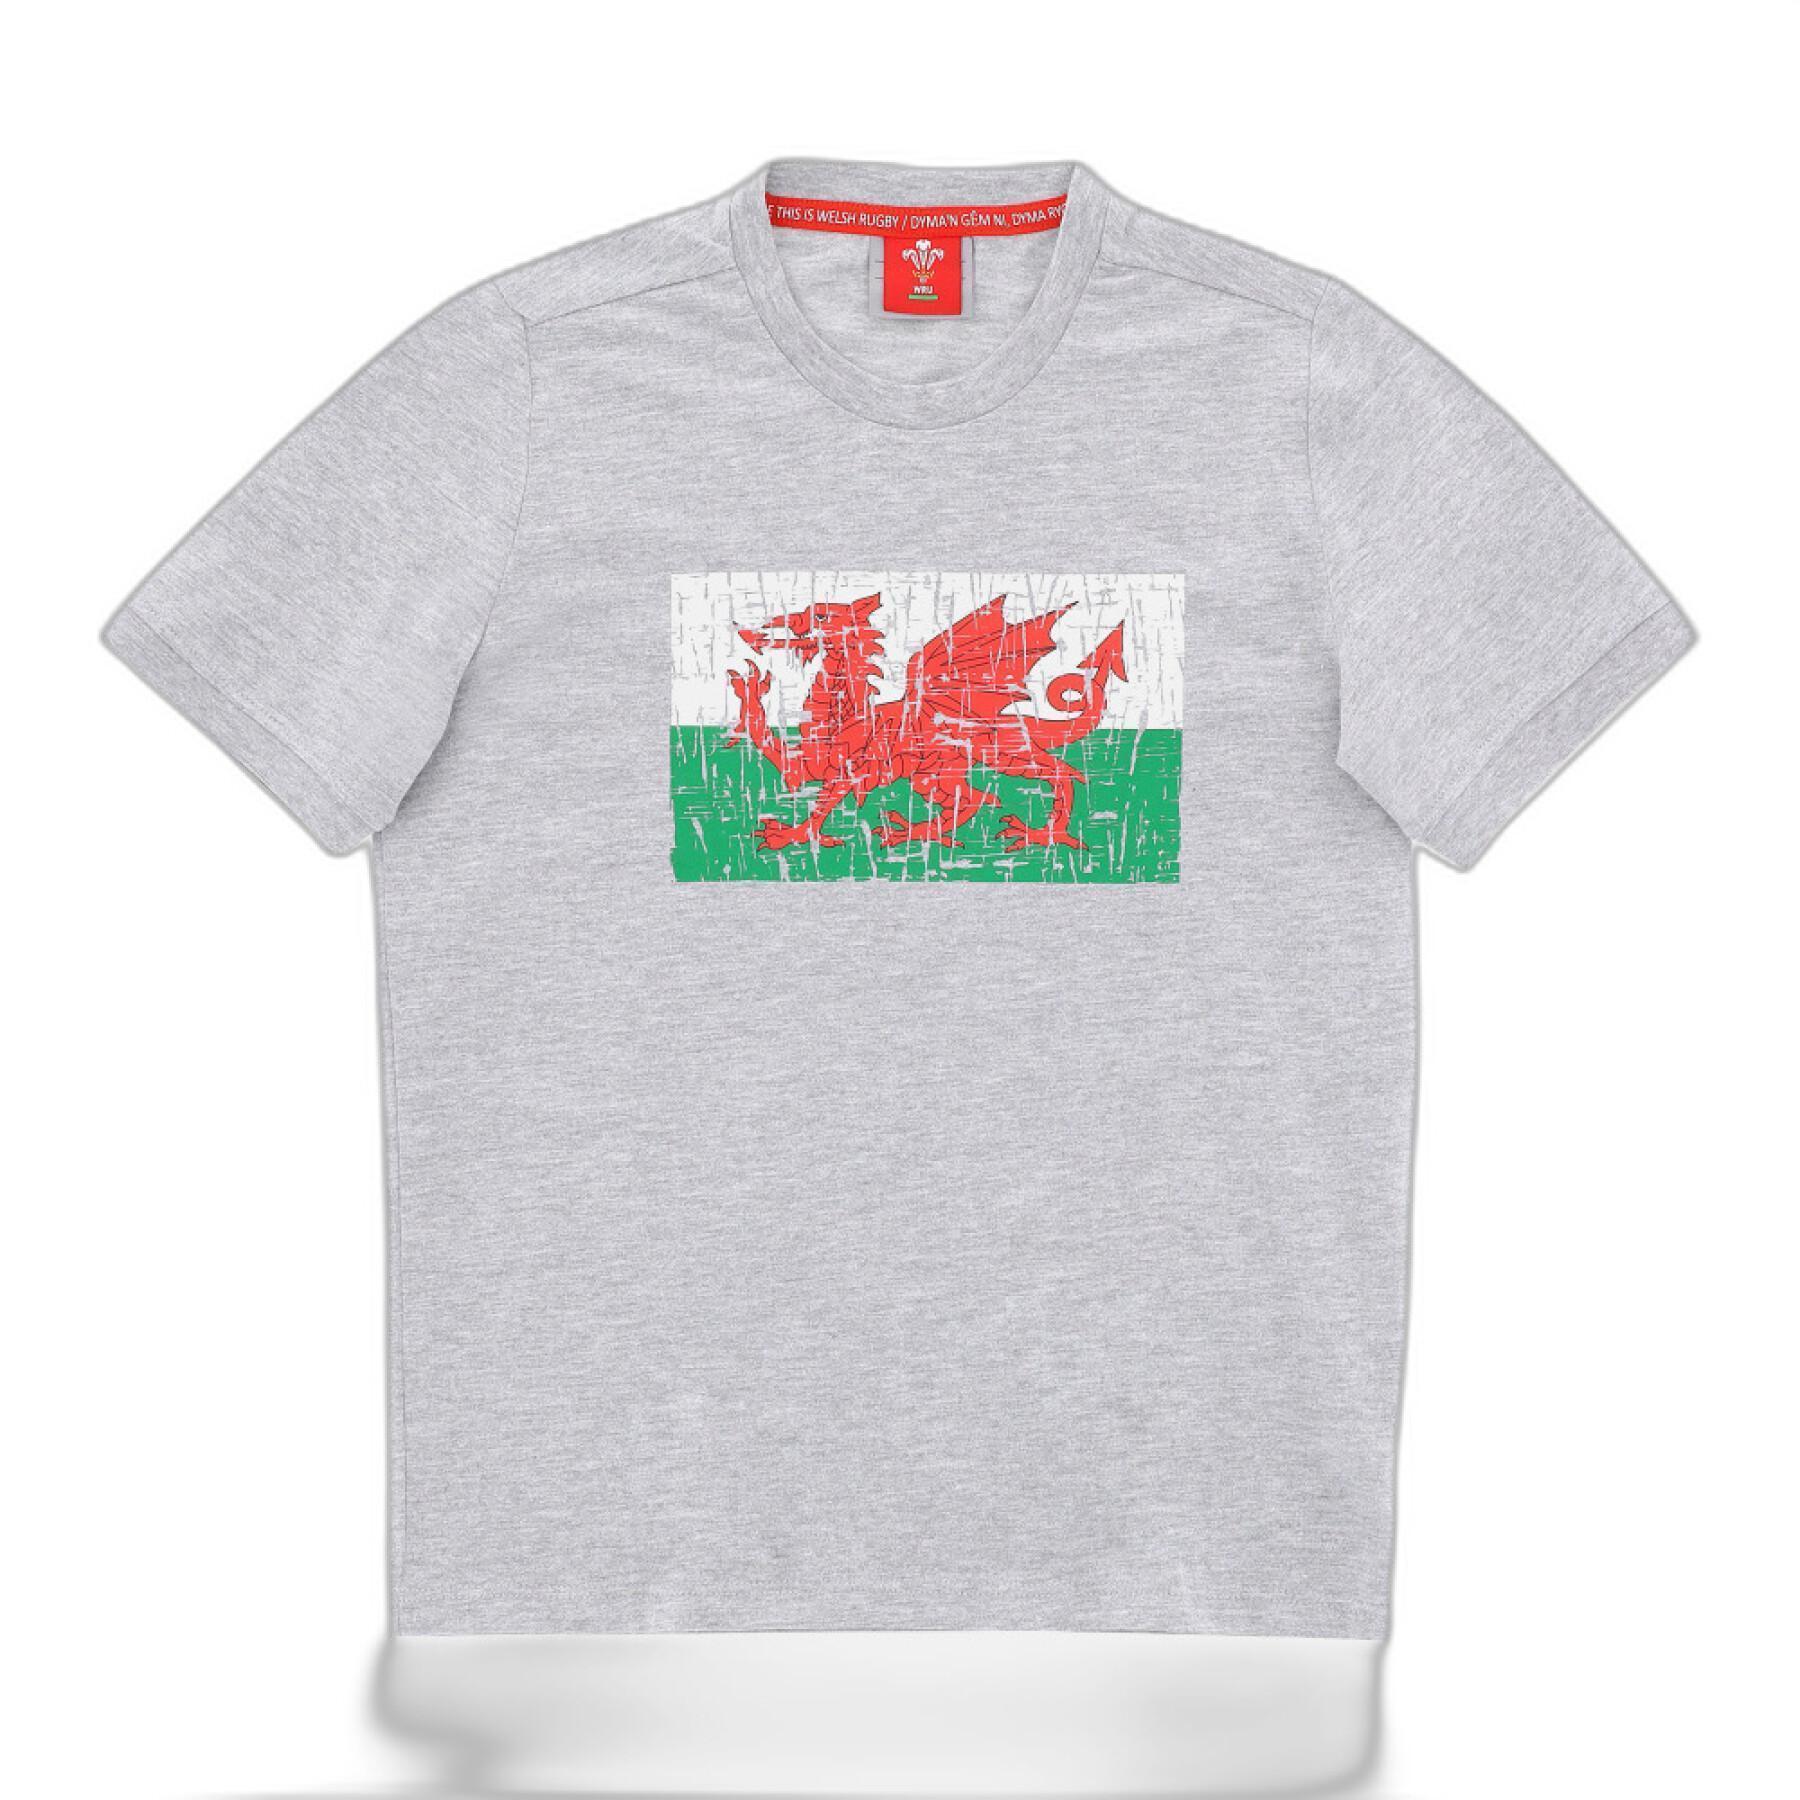 Kinder-T-shirt Pays de Galles Rugby XV 2020/21